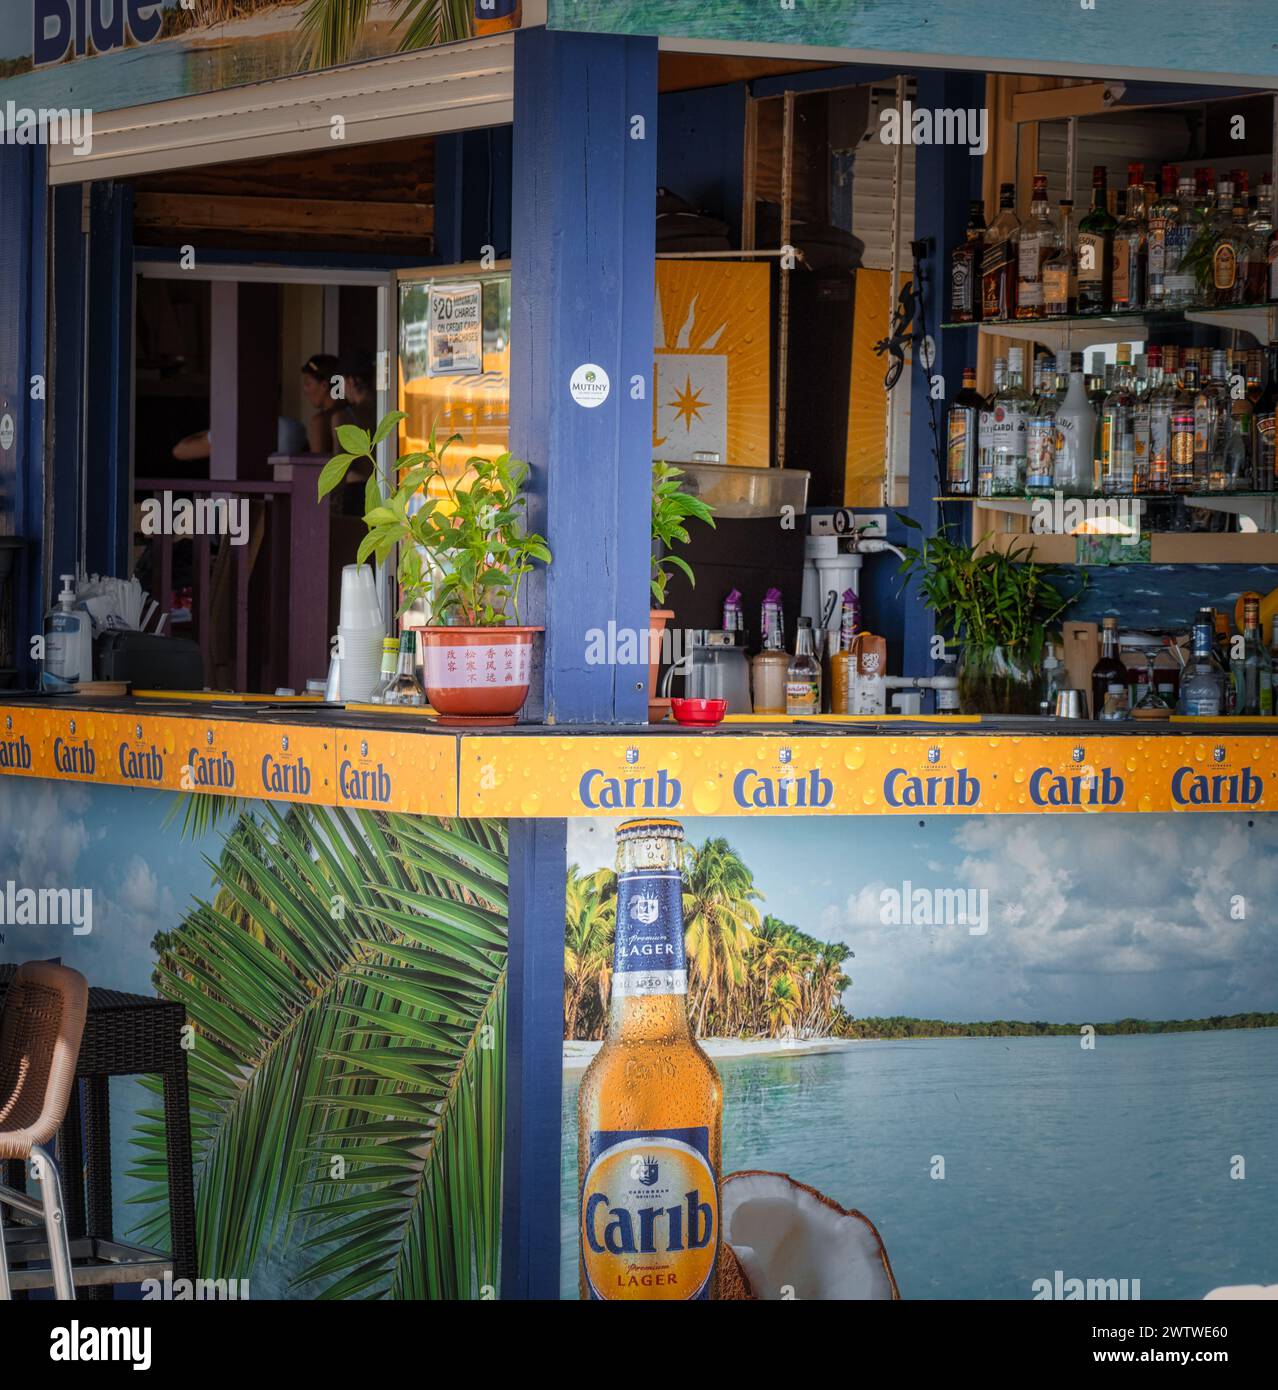 A lively tropical bar entrance decorated with Carib branding, inviting guests to a carefree vacation vibe Stock Photo